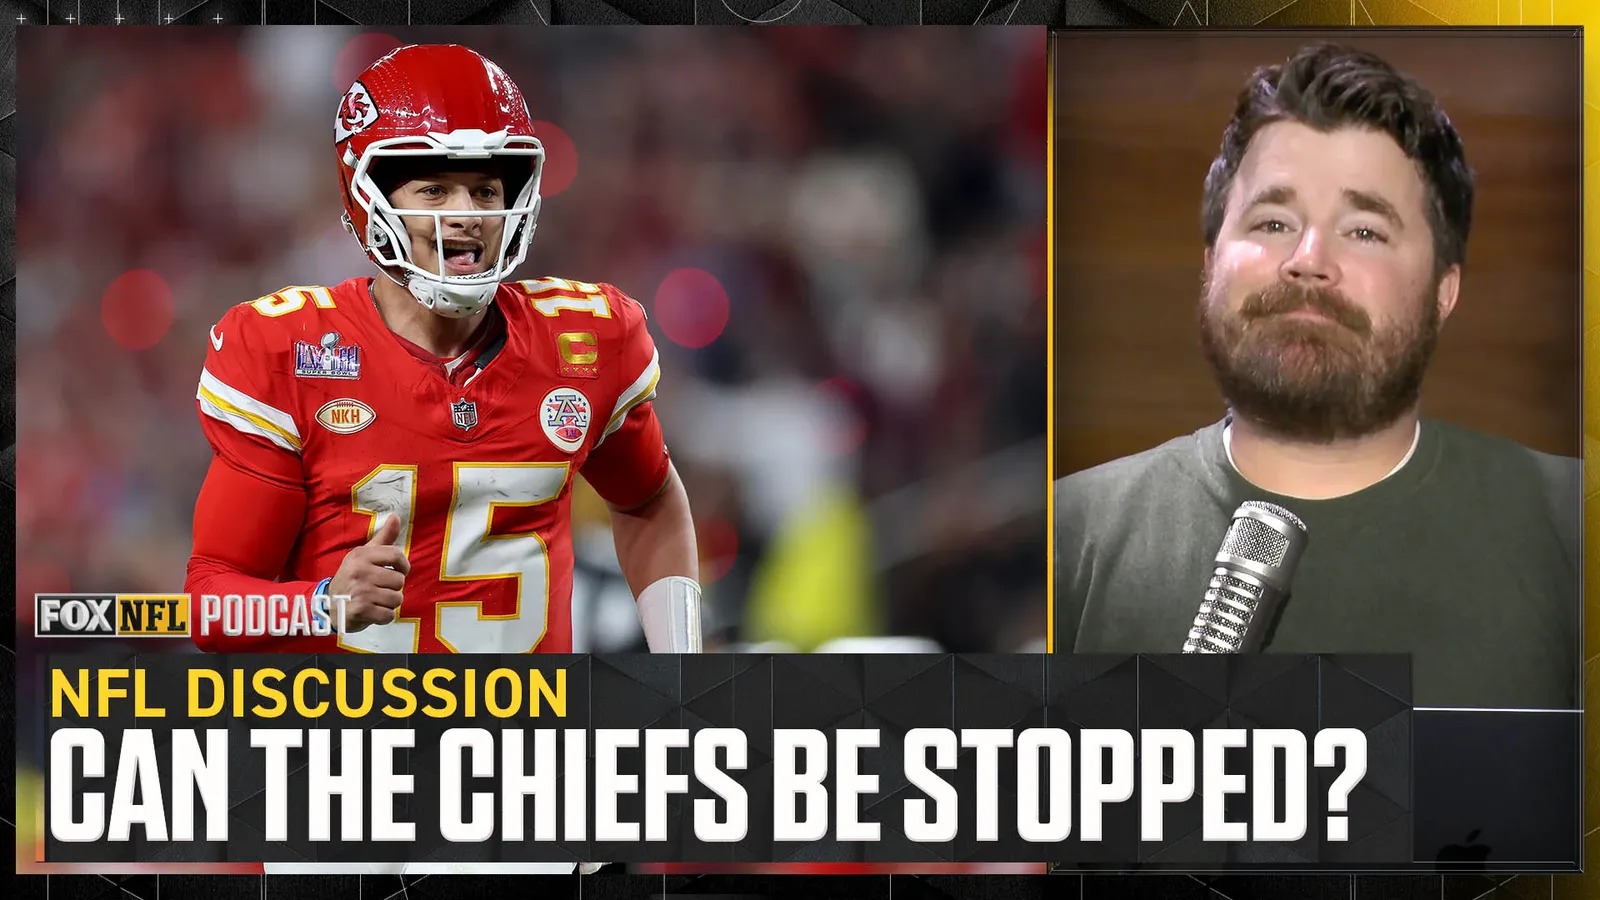 What can NFL teams do to overcome Patrick Mahomes, Kansas City Chiefs' greatness?